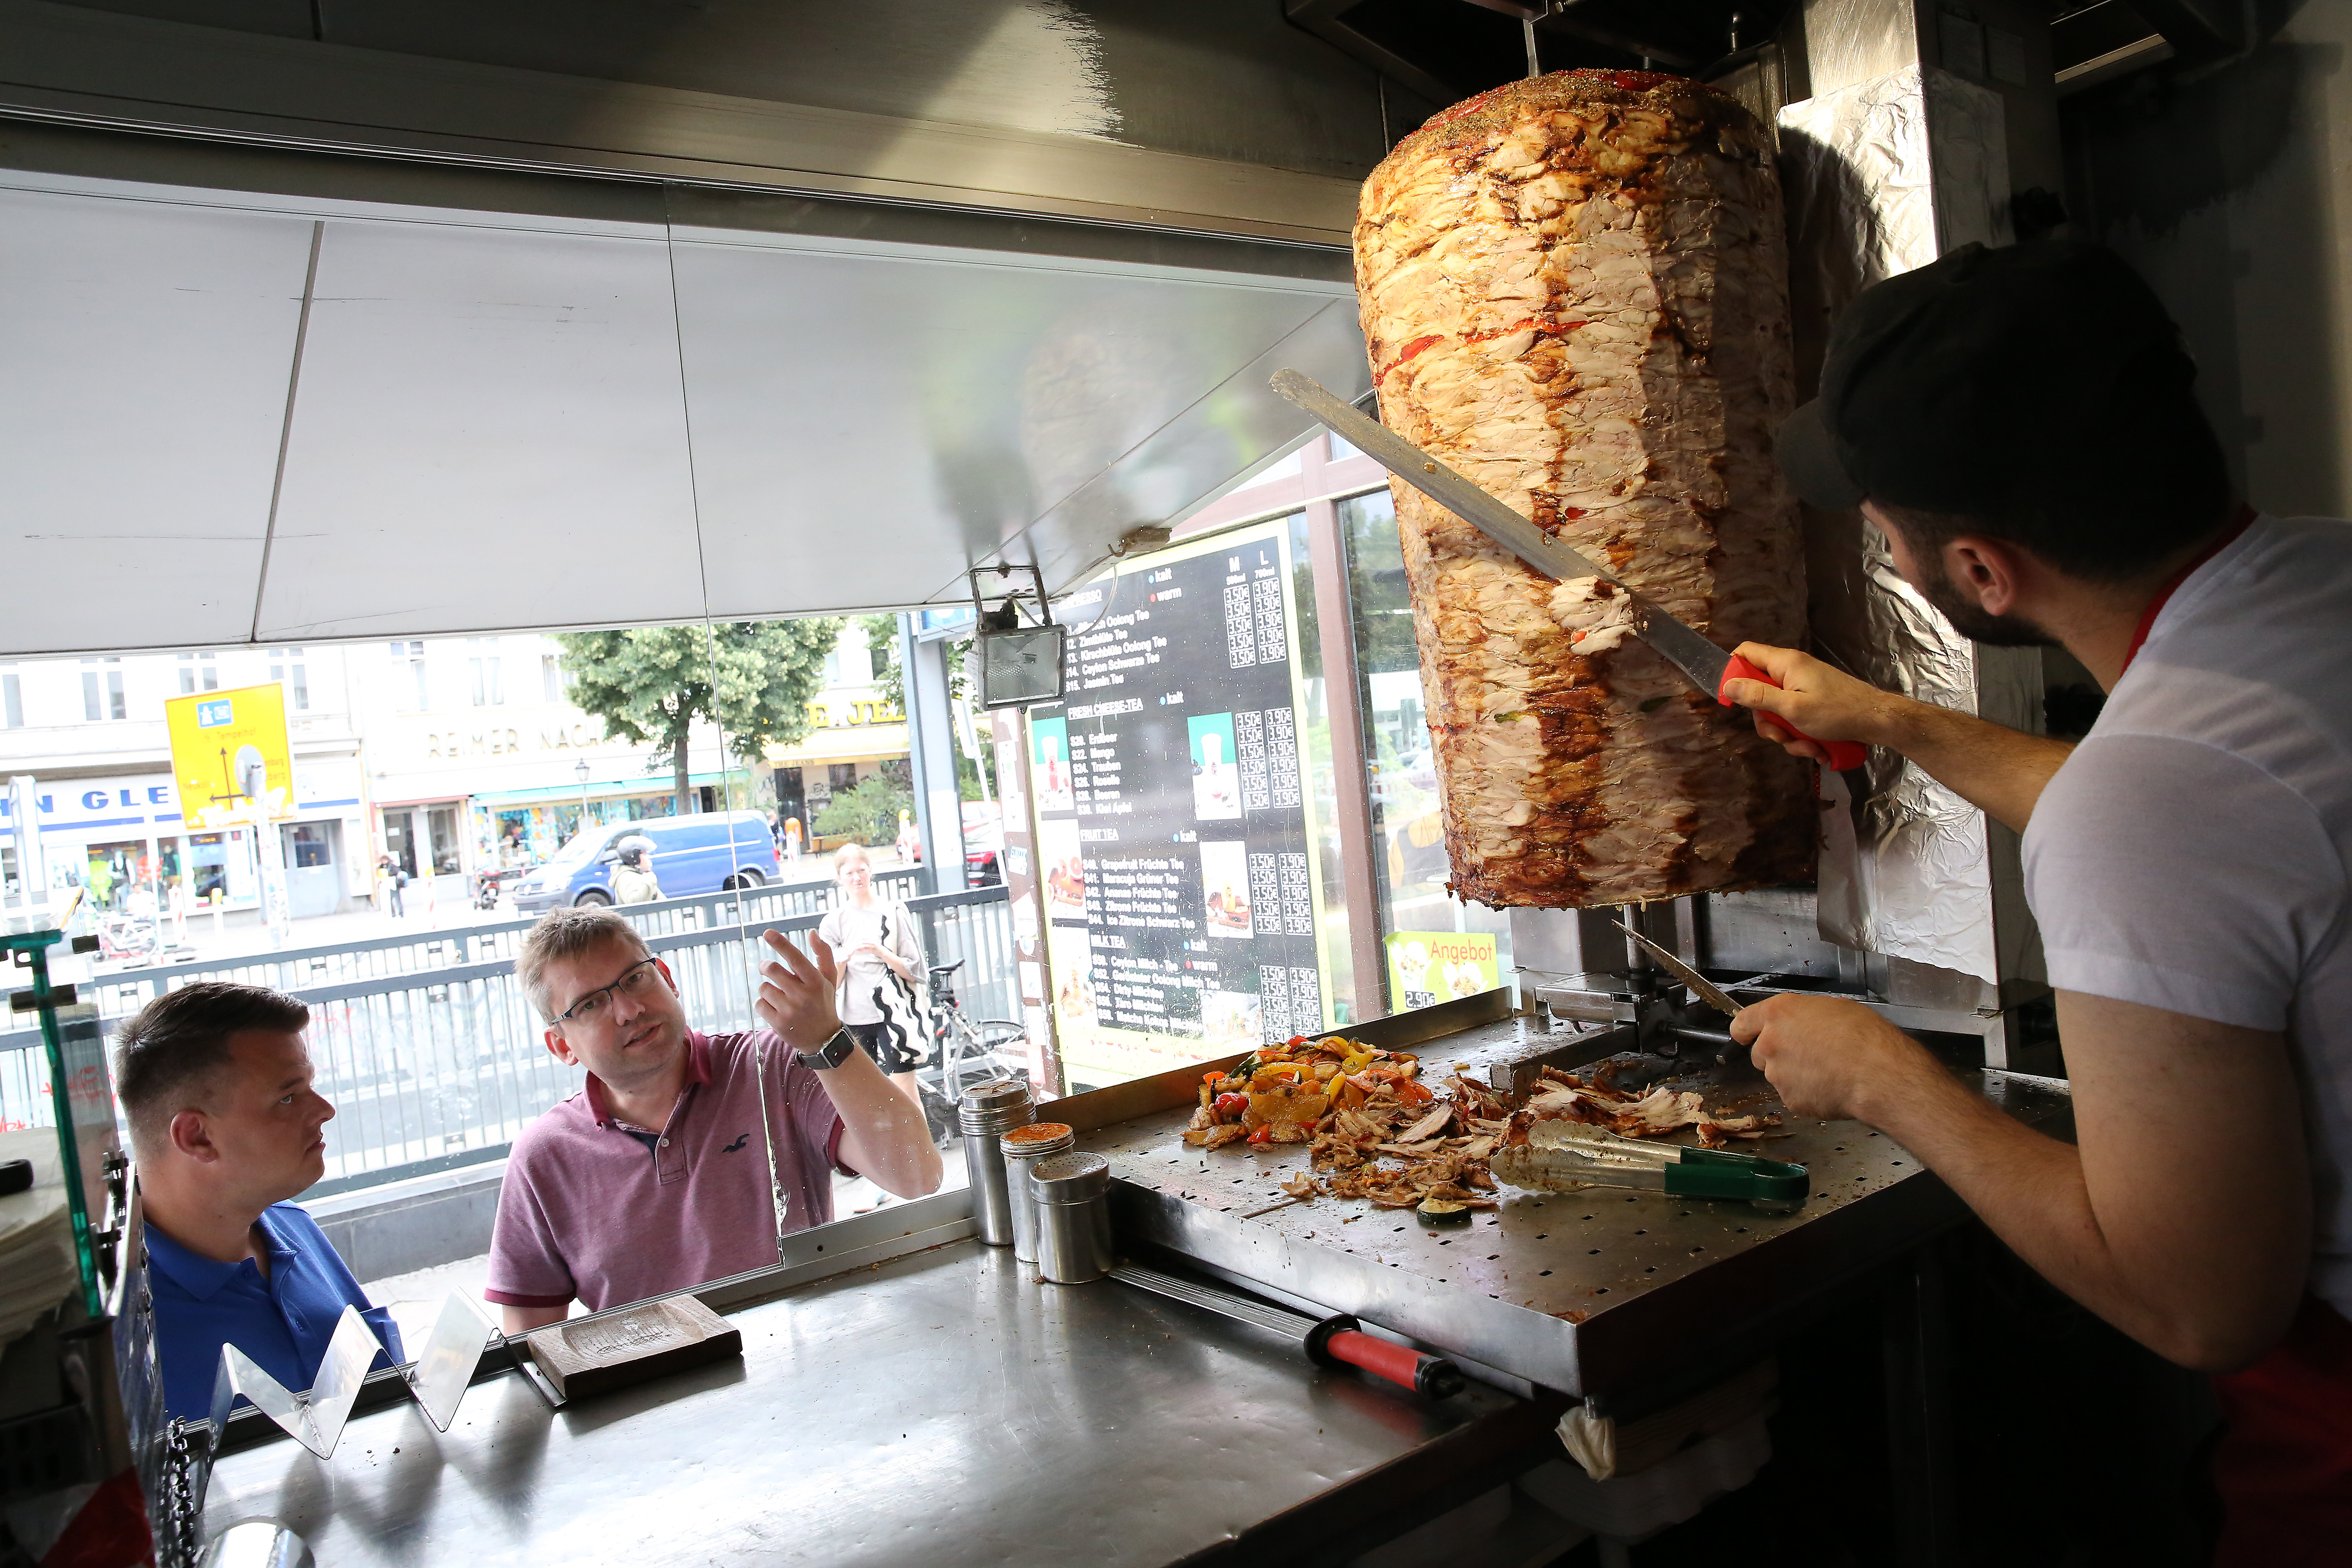 BERLIN, GERMANY - JULY 06: An employee prepares a customer's order at Mustafas Gemüse Kebap on July 06, 2022 in Berlin, Germany. The döner kebab, a fast food sandwich made of stacked, seasoned meat turned on a rotisserie, was popularized in Germany in the early 1970s by Turkish guest workers (Gastarbeiter in German, or migrants arriving in Germany after World War II to counter labor shortages), with more stands offering the dish in Berlin than in Istanbul, and many considering it to be Germany's national dish.